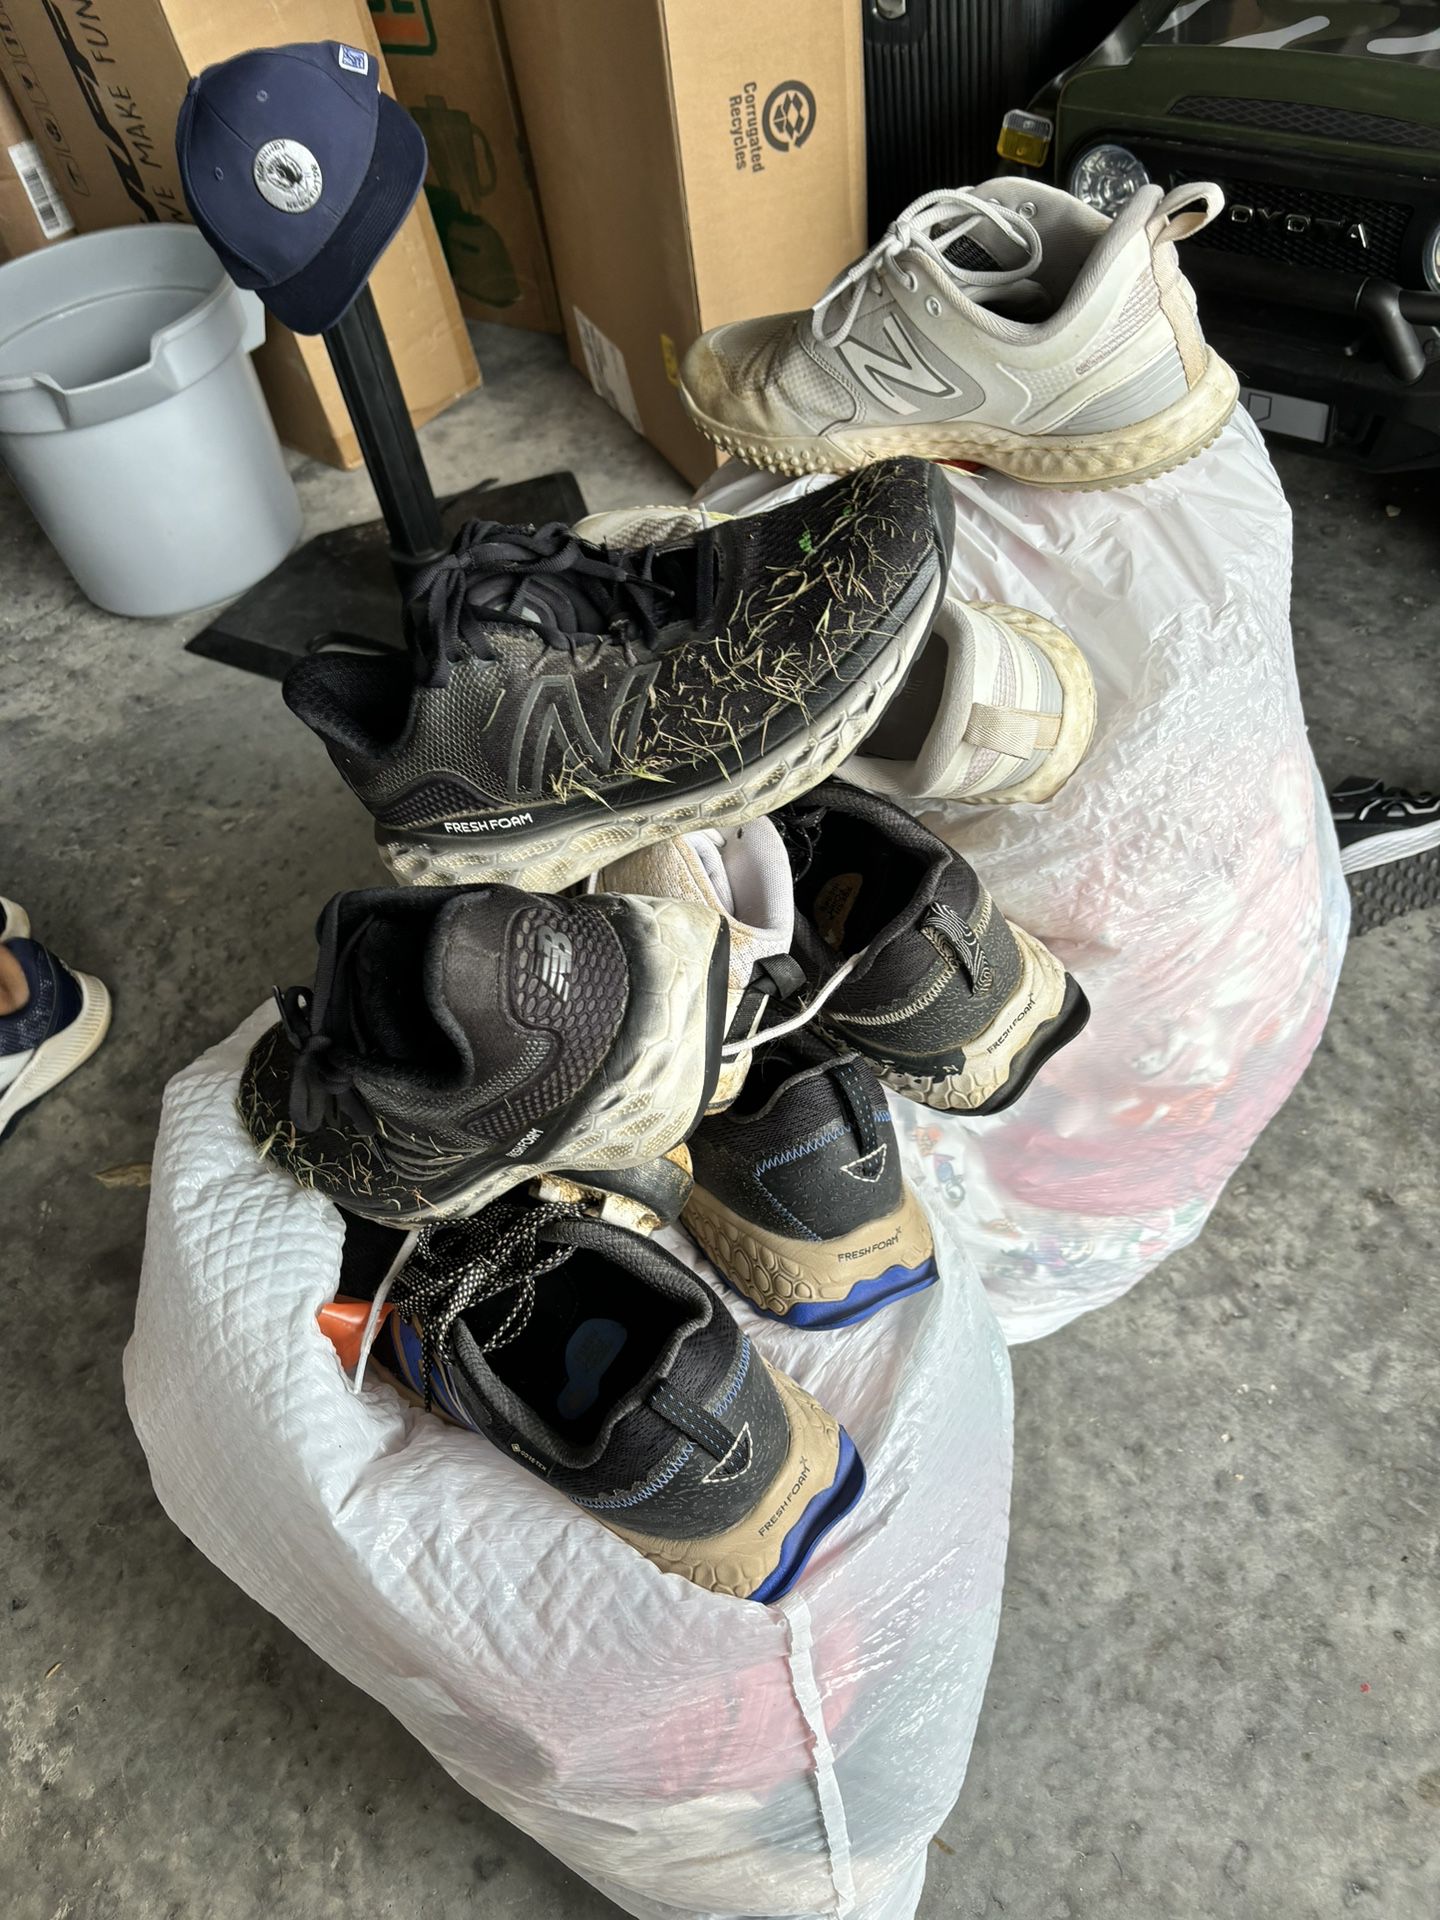 Free MENS SHOES AND BABY GIRL CLOTHES AND KIDS SHOES